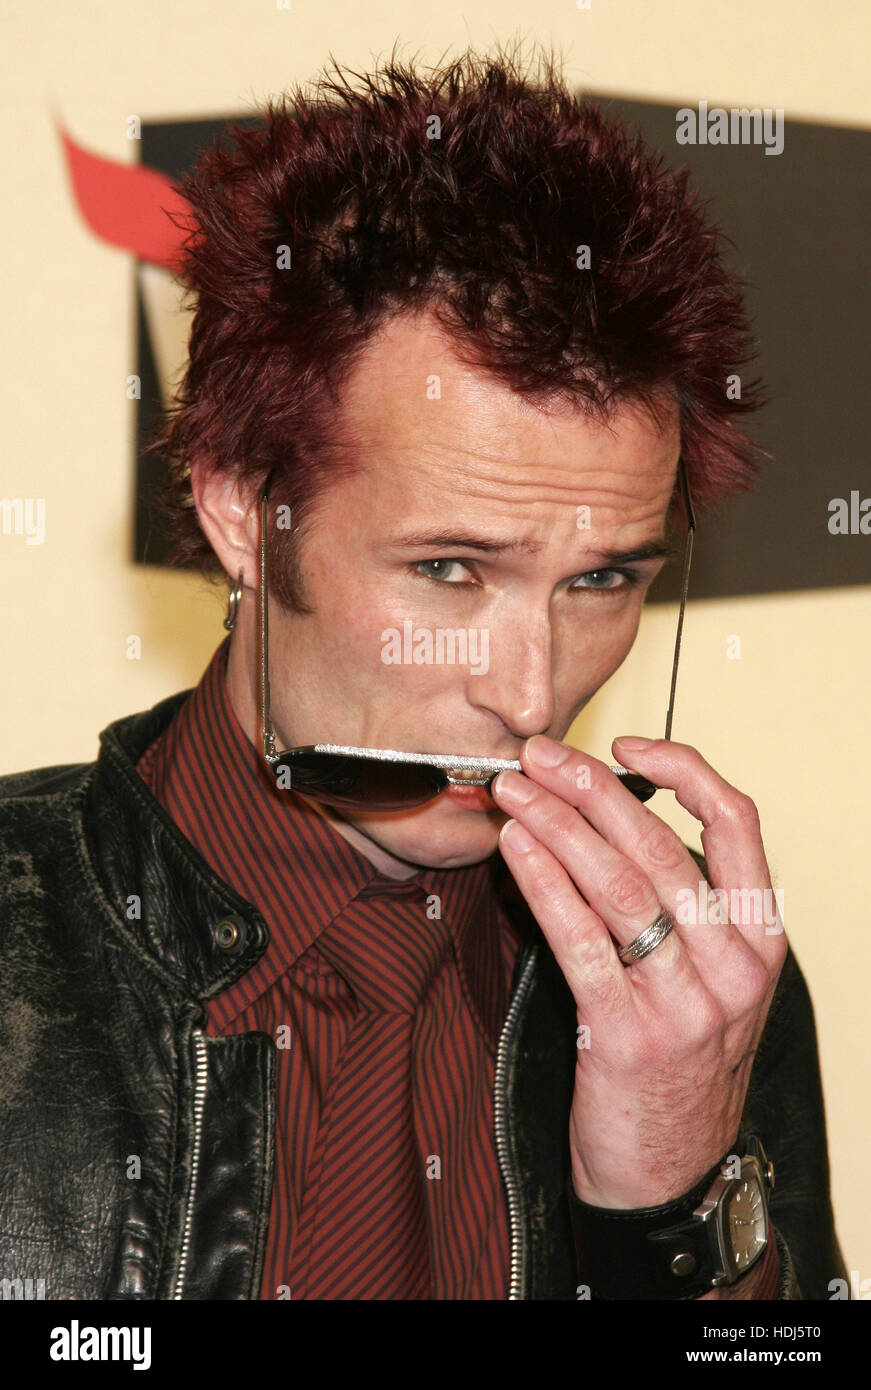 Scott Weiland at VH-1's Big in 2004 award show on December 1, 2004 in Los Angeles. Photo credit: Francis Specker Stock Photo